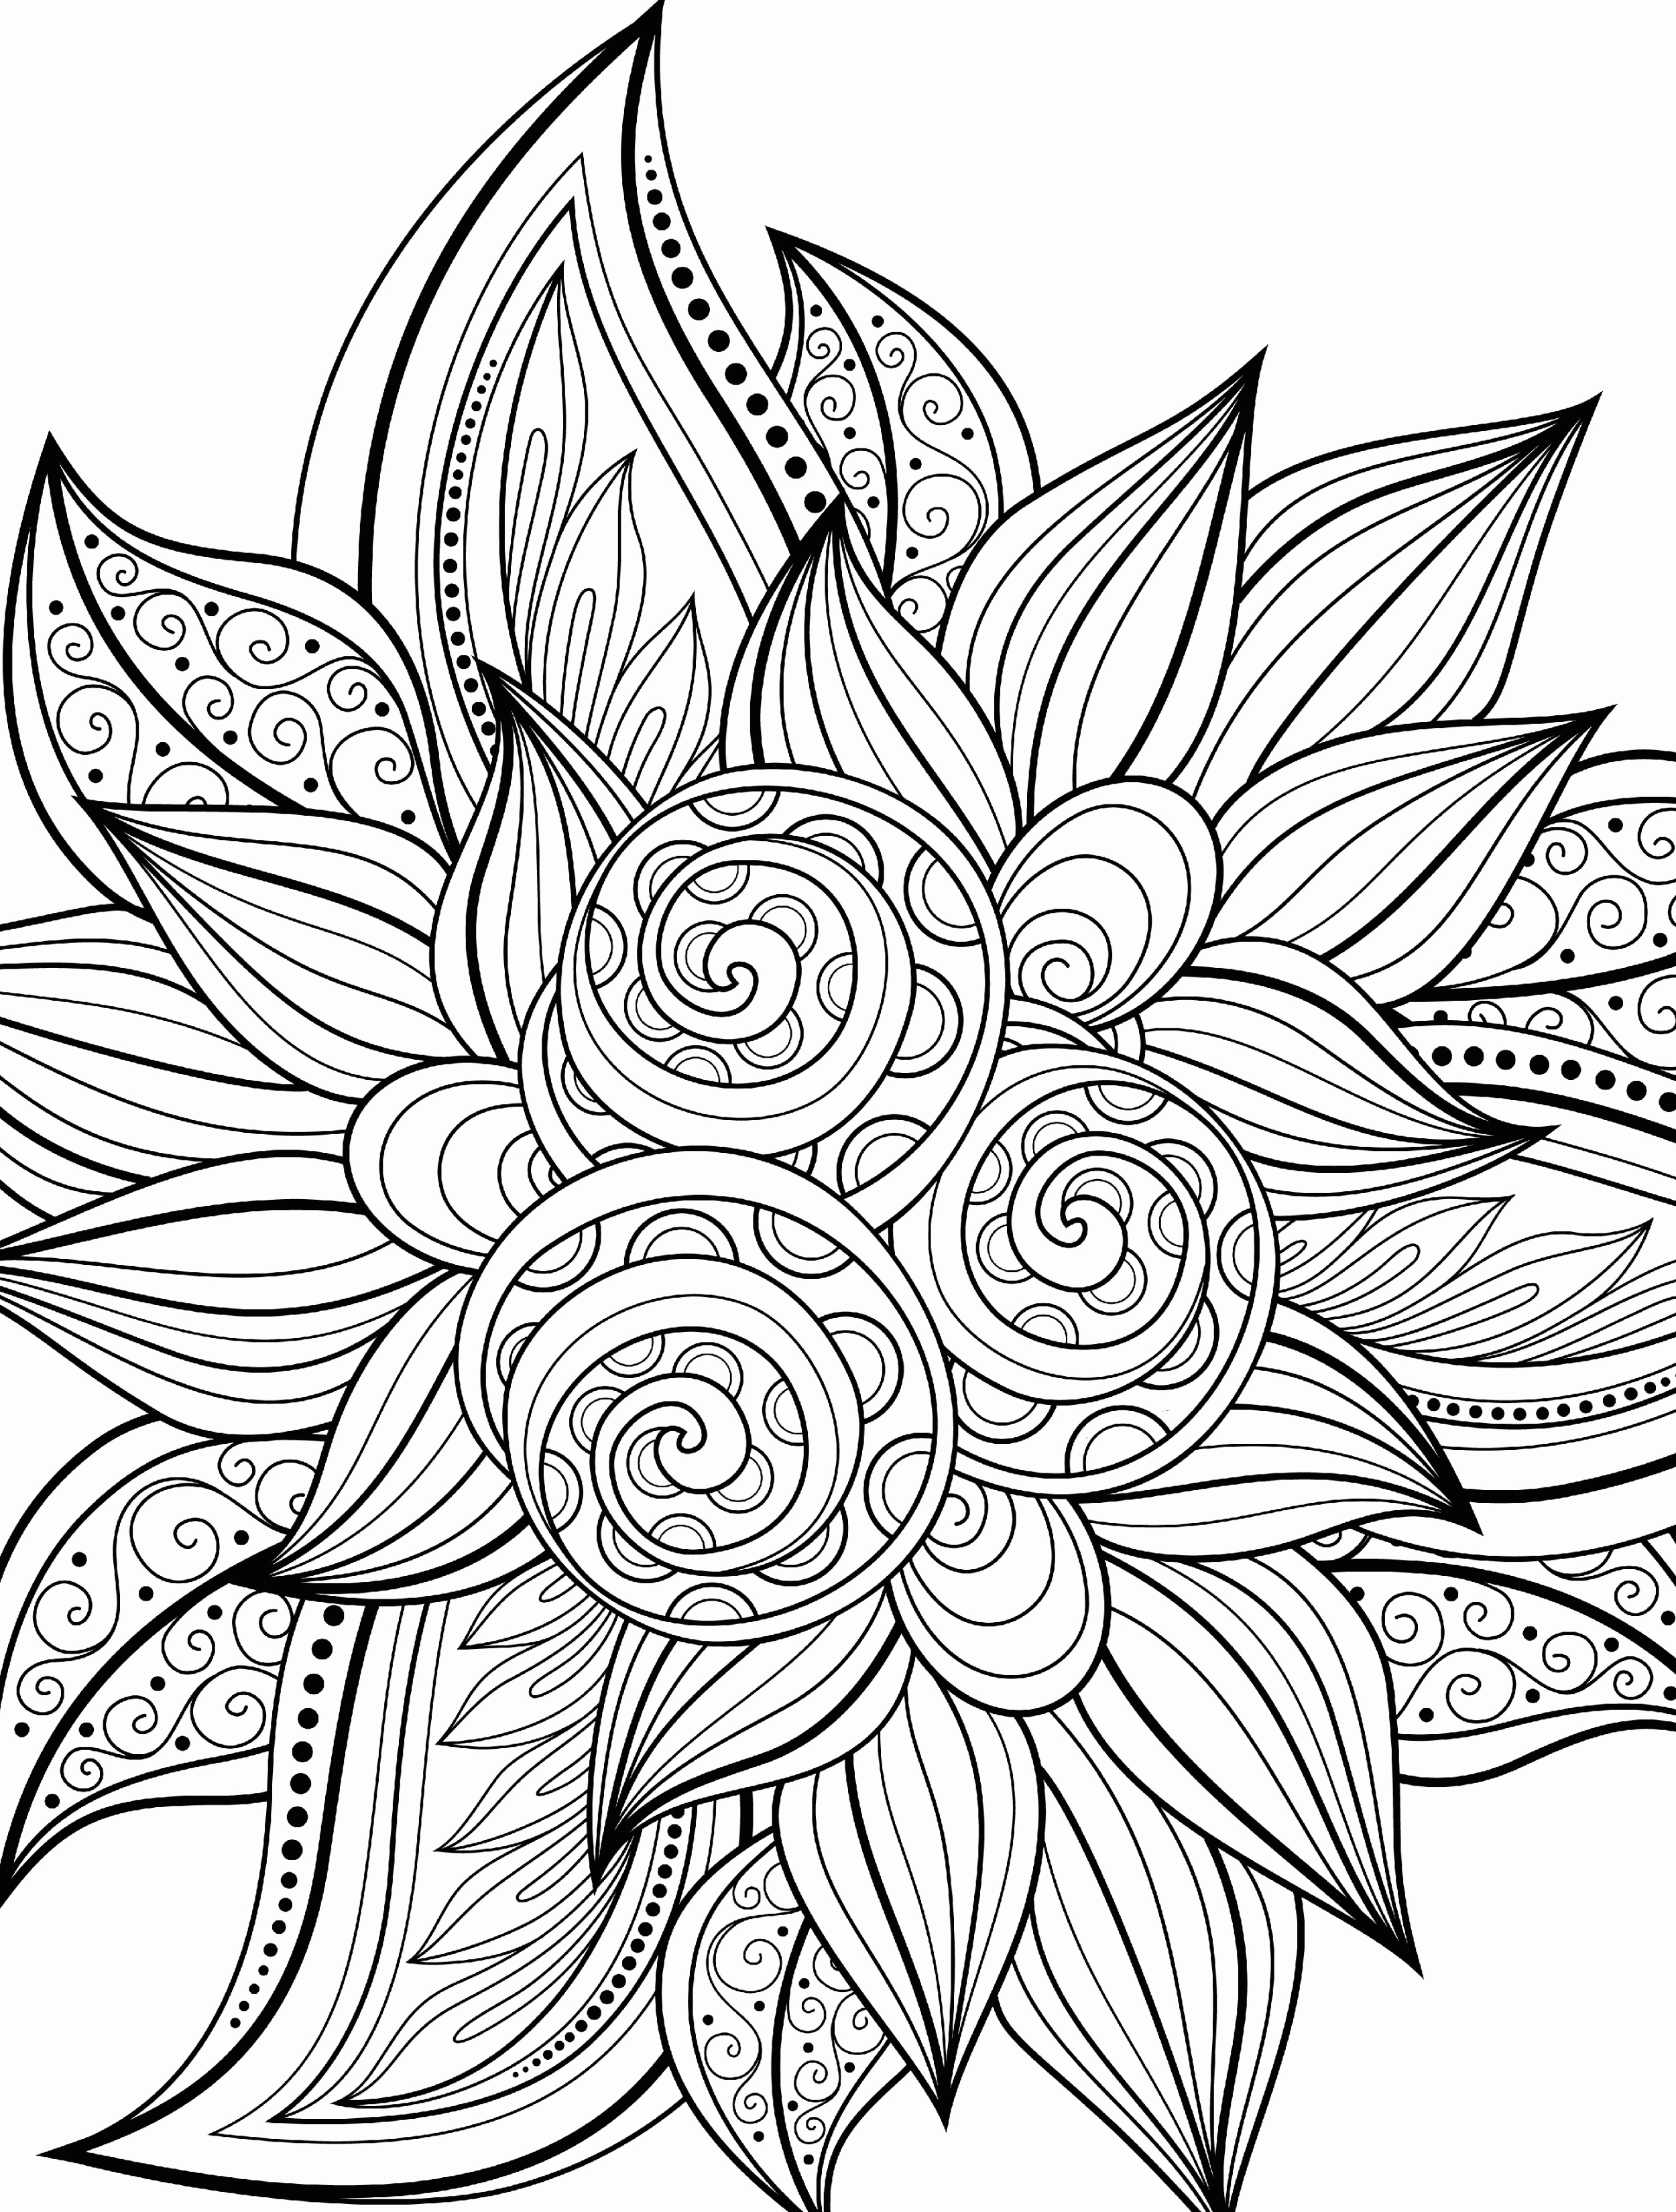 Coloring Pages | Coloring For Adults, Coloring Pages ...